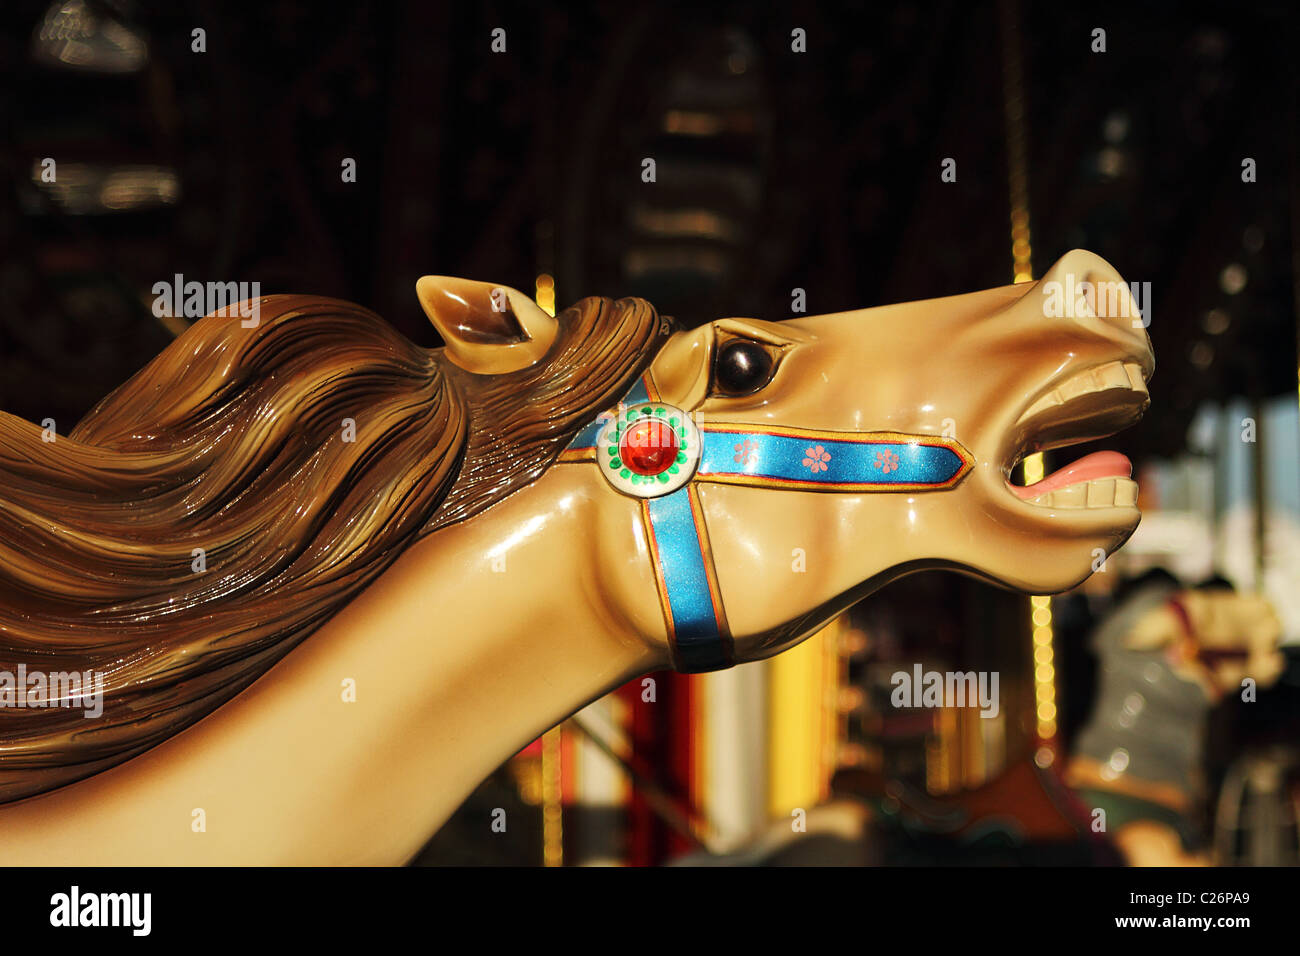 Beautifully decorated carousel horses on a merry-go-round Stock Photo